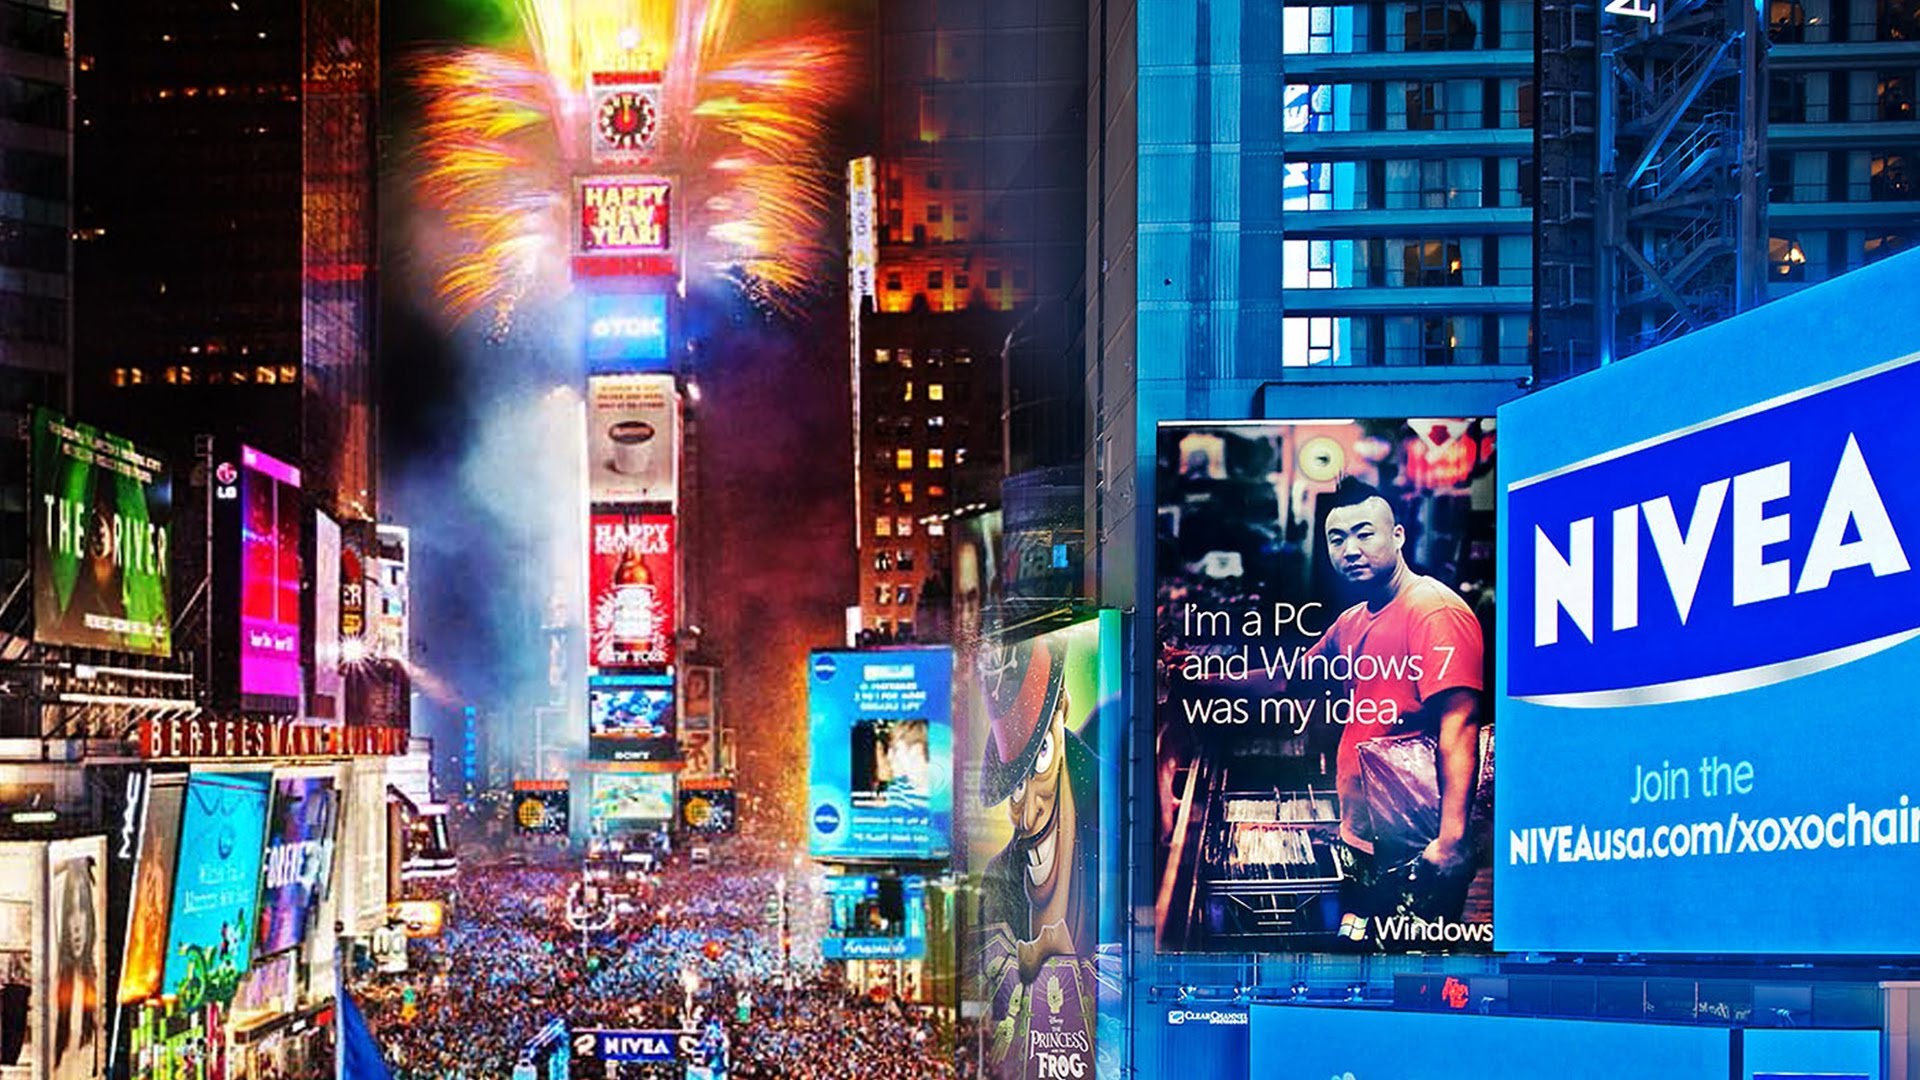 Times Square New Years Eve - HD Wallpaper 